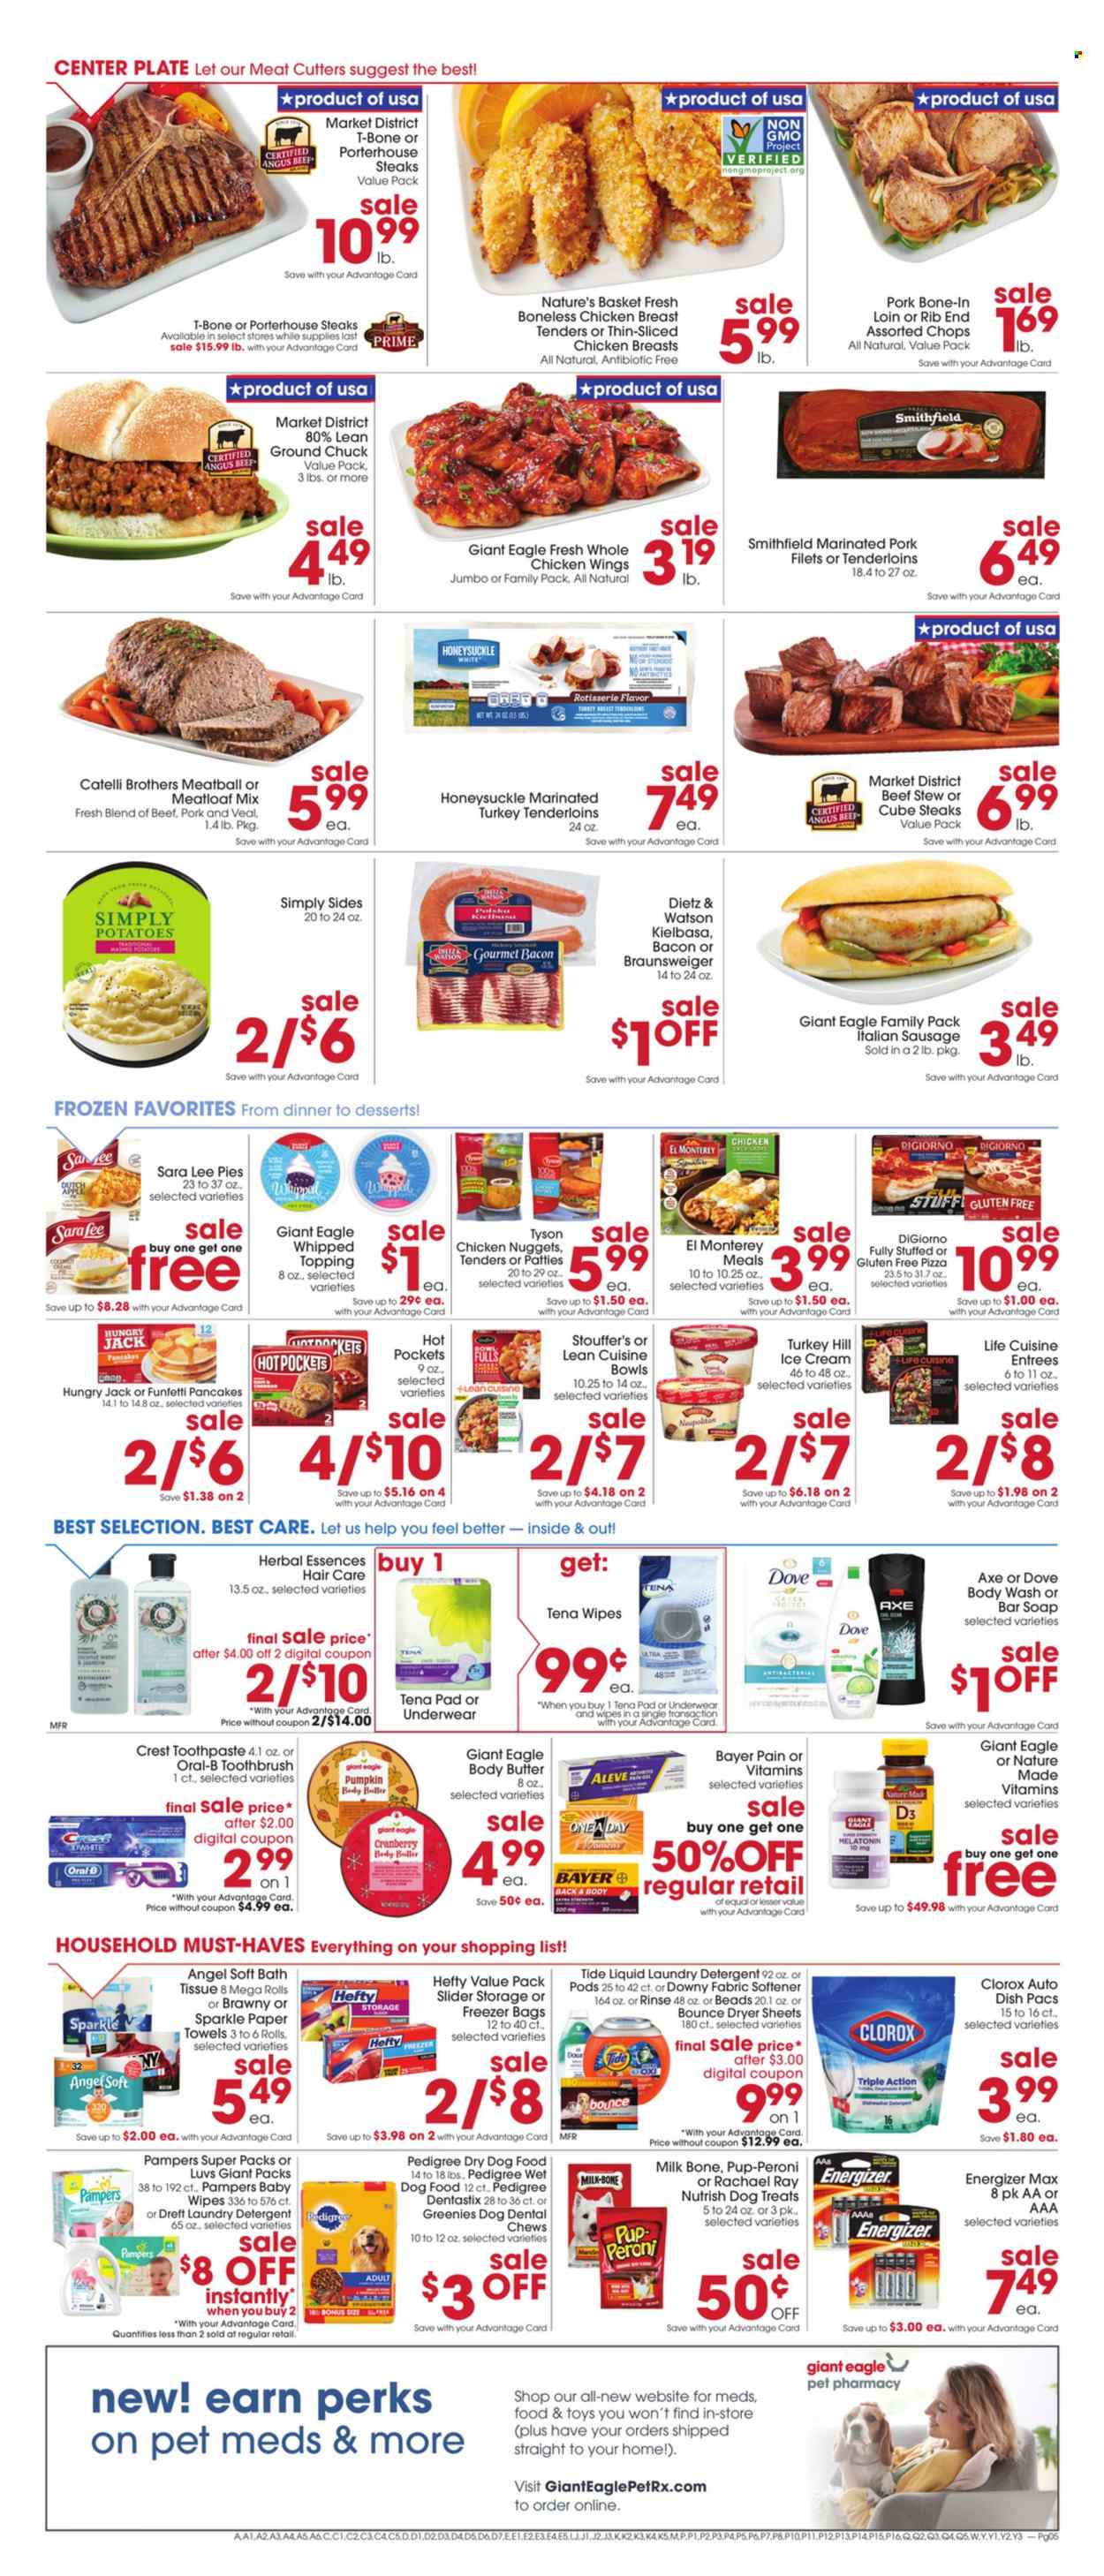 thumbnail - Giant Eagle Flyer - 12/01/2022 - 12/07/2022 - Sales products - Sara Lee, pumpkin, mashed potatoes, hot pocket, pizza, chicken tenders, nuggets, pancakes, chicken nuggets, meatloaf, Lean Cuisine, bacon, Dietz & Watson, sausage, italian sausage, kielbasa, milk, ice cream, chicken wings, Stouffer's, Dove, chewing gum, topping, coconut water, turkey breast, whole chicken, turkey tenderloin, beef meat, ground chuck, t-bone steak, steak, portehouse steak, pork meat, marinated pork, wipes, Pampers, baby wipes, bath tissue, kitchen towels, paper towels, detergent, Clorox, Tide, fabric softener, laundry detergent, Bounce, dryer sheets, Downy Laundry, body wash, soap bar, soap, toothbrush, Oral-B, toothpaste, Crest, Herbal Essences, body butter, Axe, Hefty, basket, plate, freezer bag, Energizer, animal food, Greenies, dry dog food, dental chews, dog food, wet dog food, Dentastix, Pedigree, Pup-Peroni, Nutrish, Aleve, Melatonin, Nature Made, vitamin D3, Bayer. Page 3.